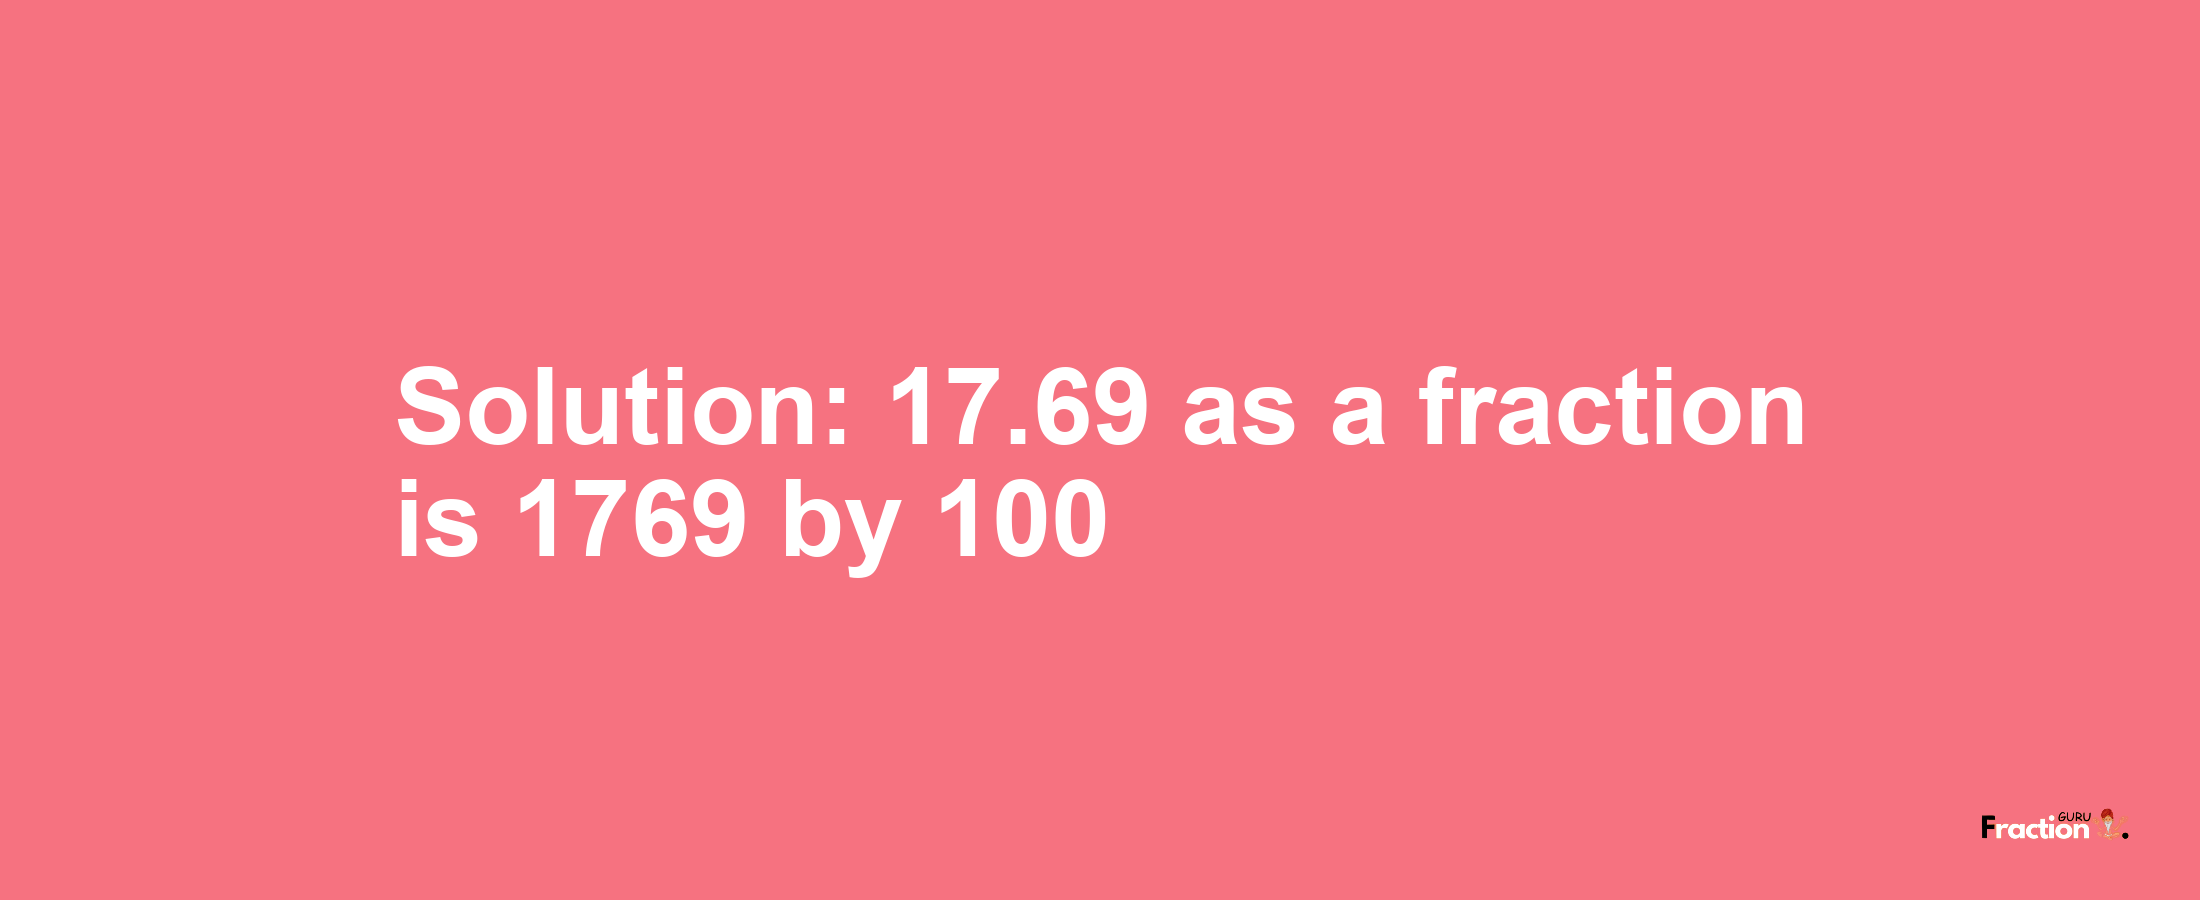 Solution:17.69 as a fraction is 1769/100